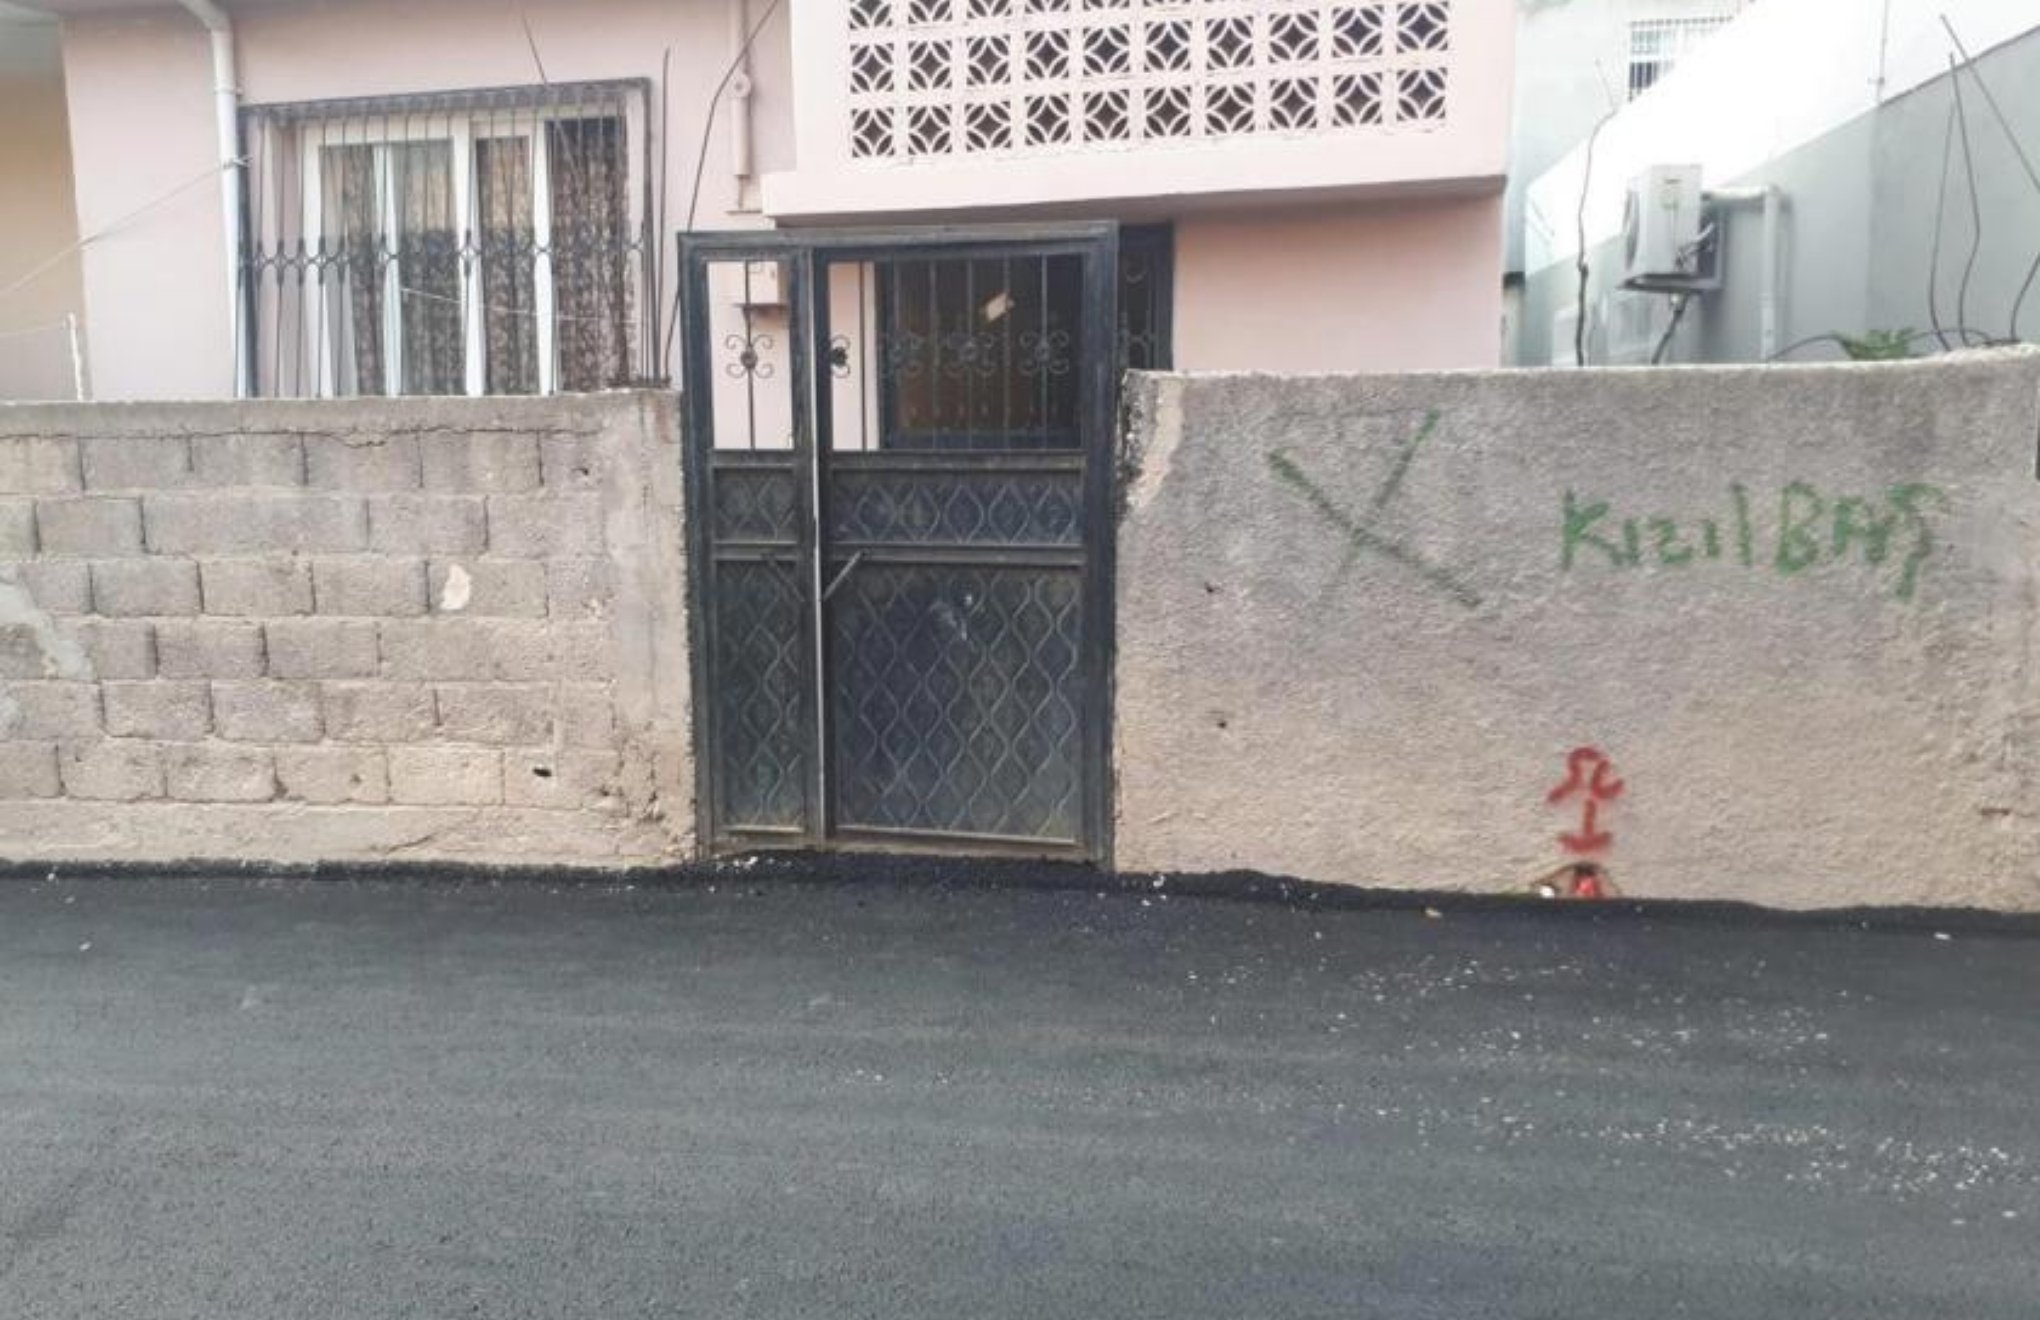 Alevi homes marked in Adana in 38th similar incident in a decade